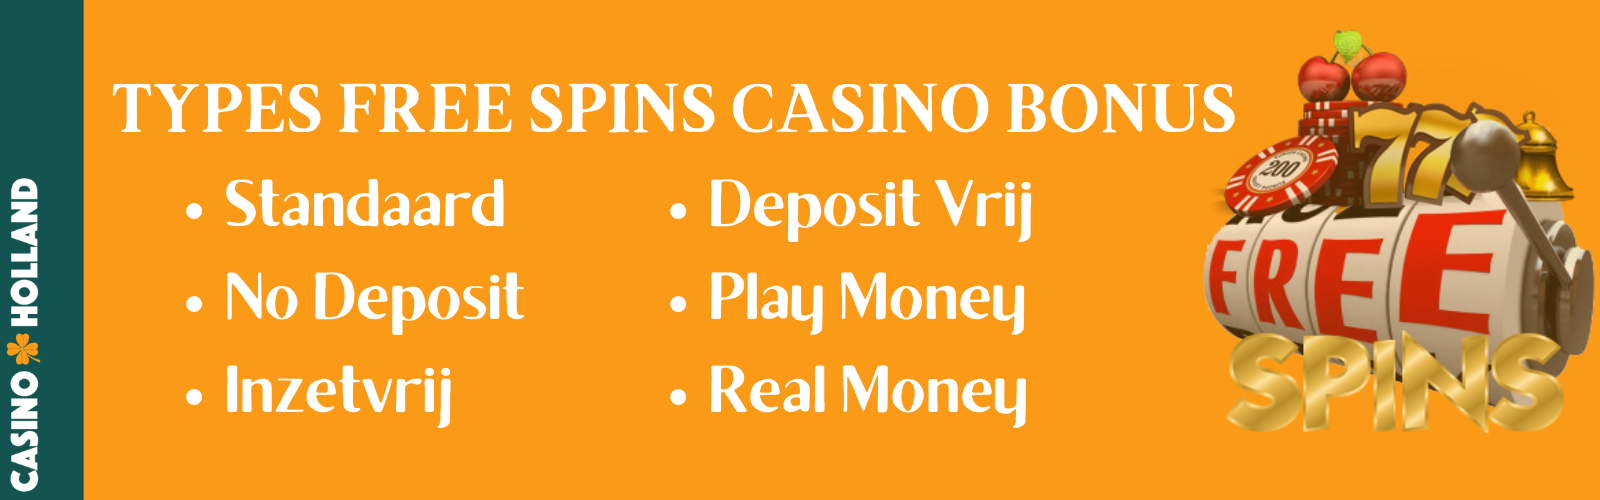 Types Free Spins